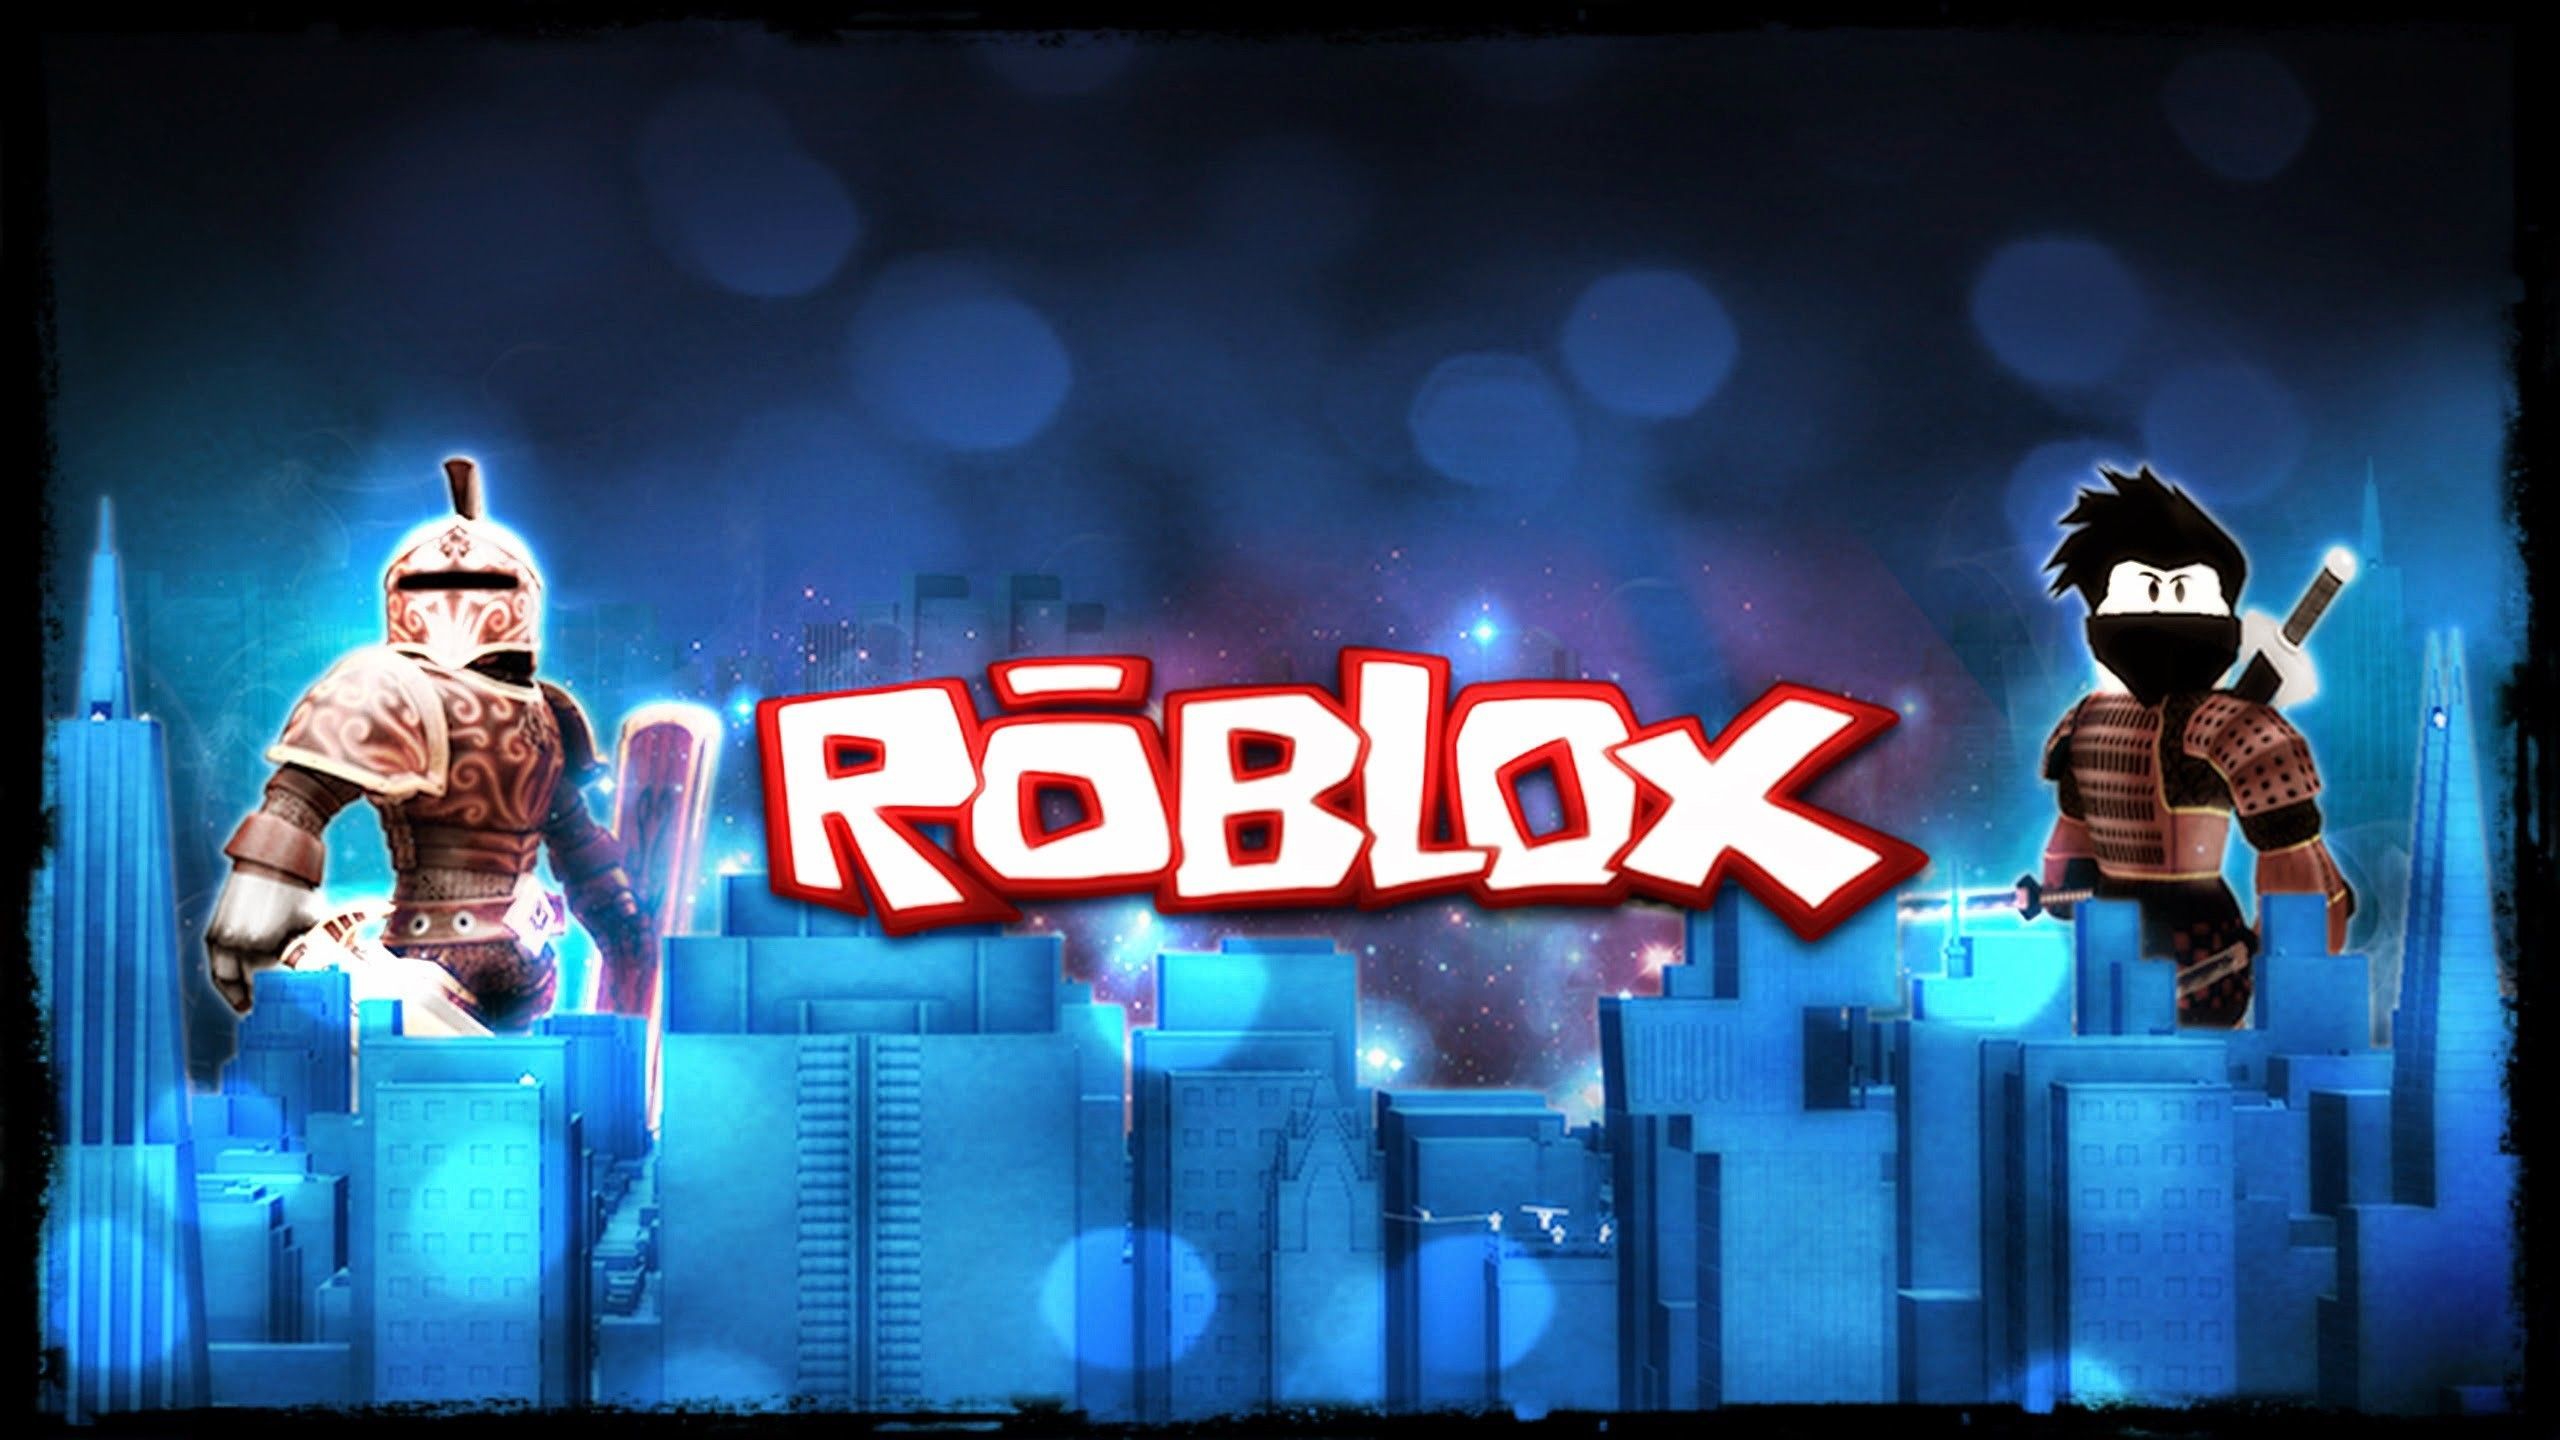 Roblox HD Wallpapers and 4K Backgrounds - Wallpapers Den